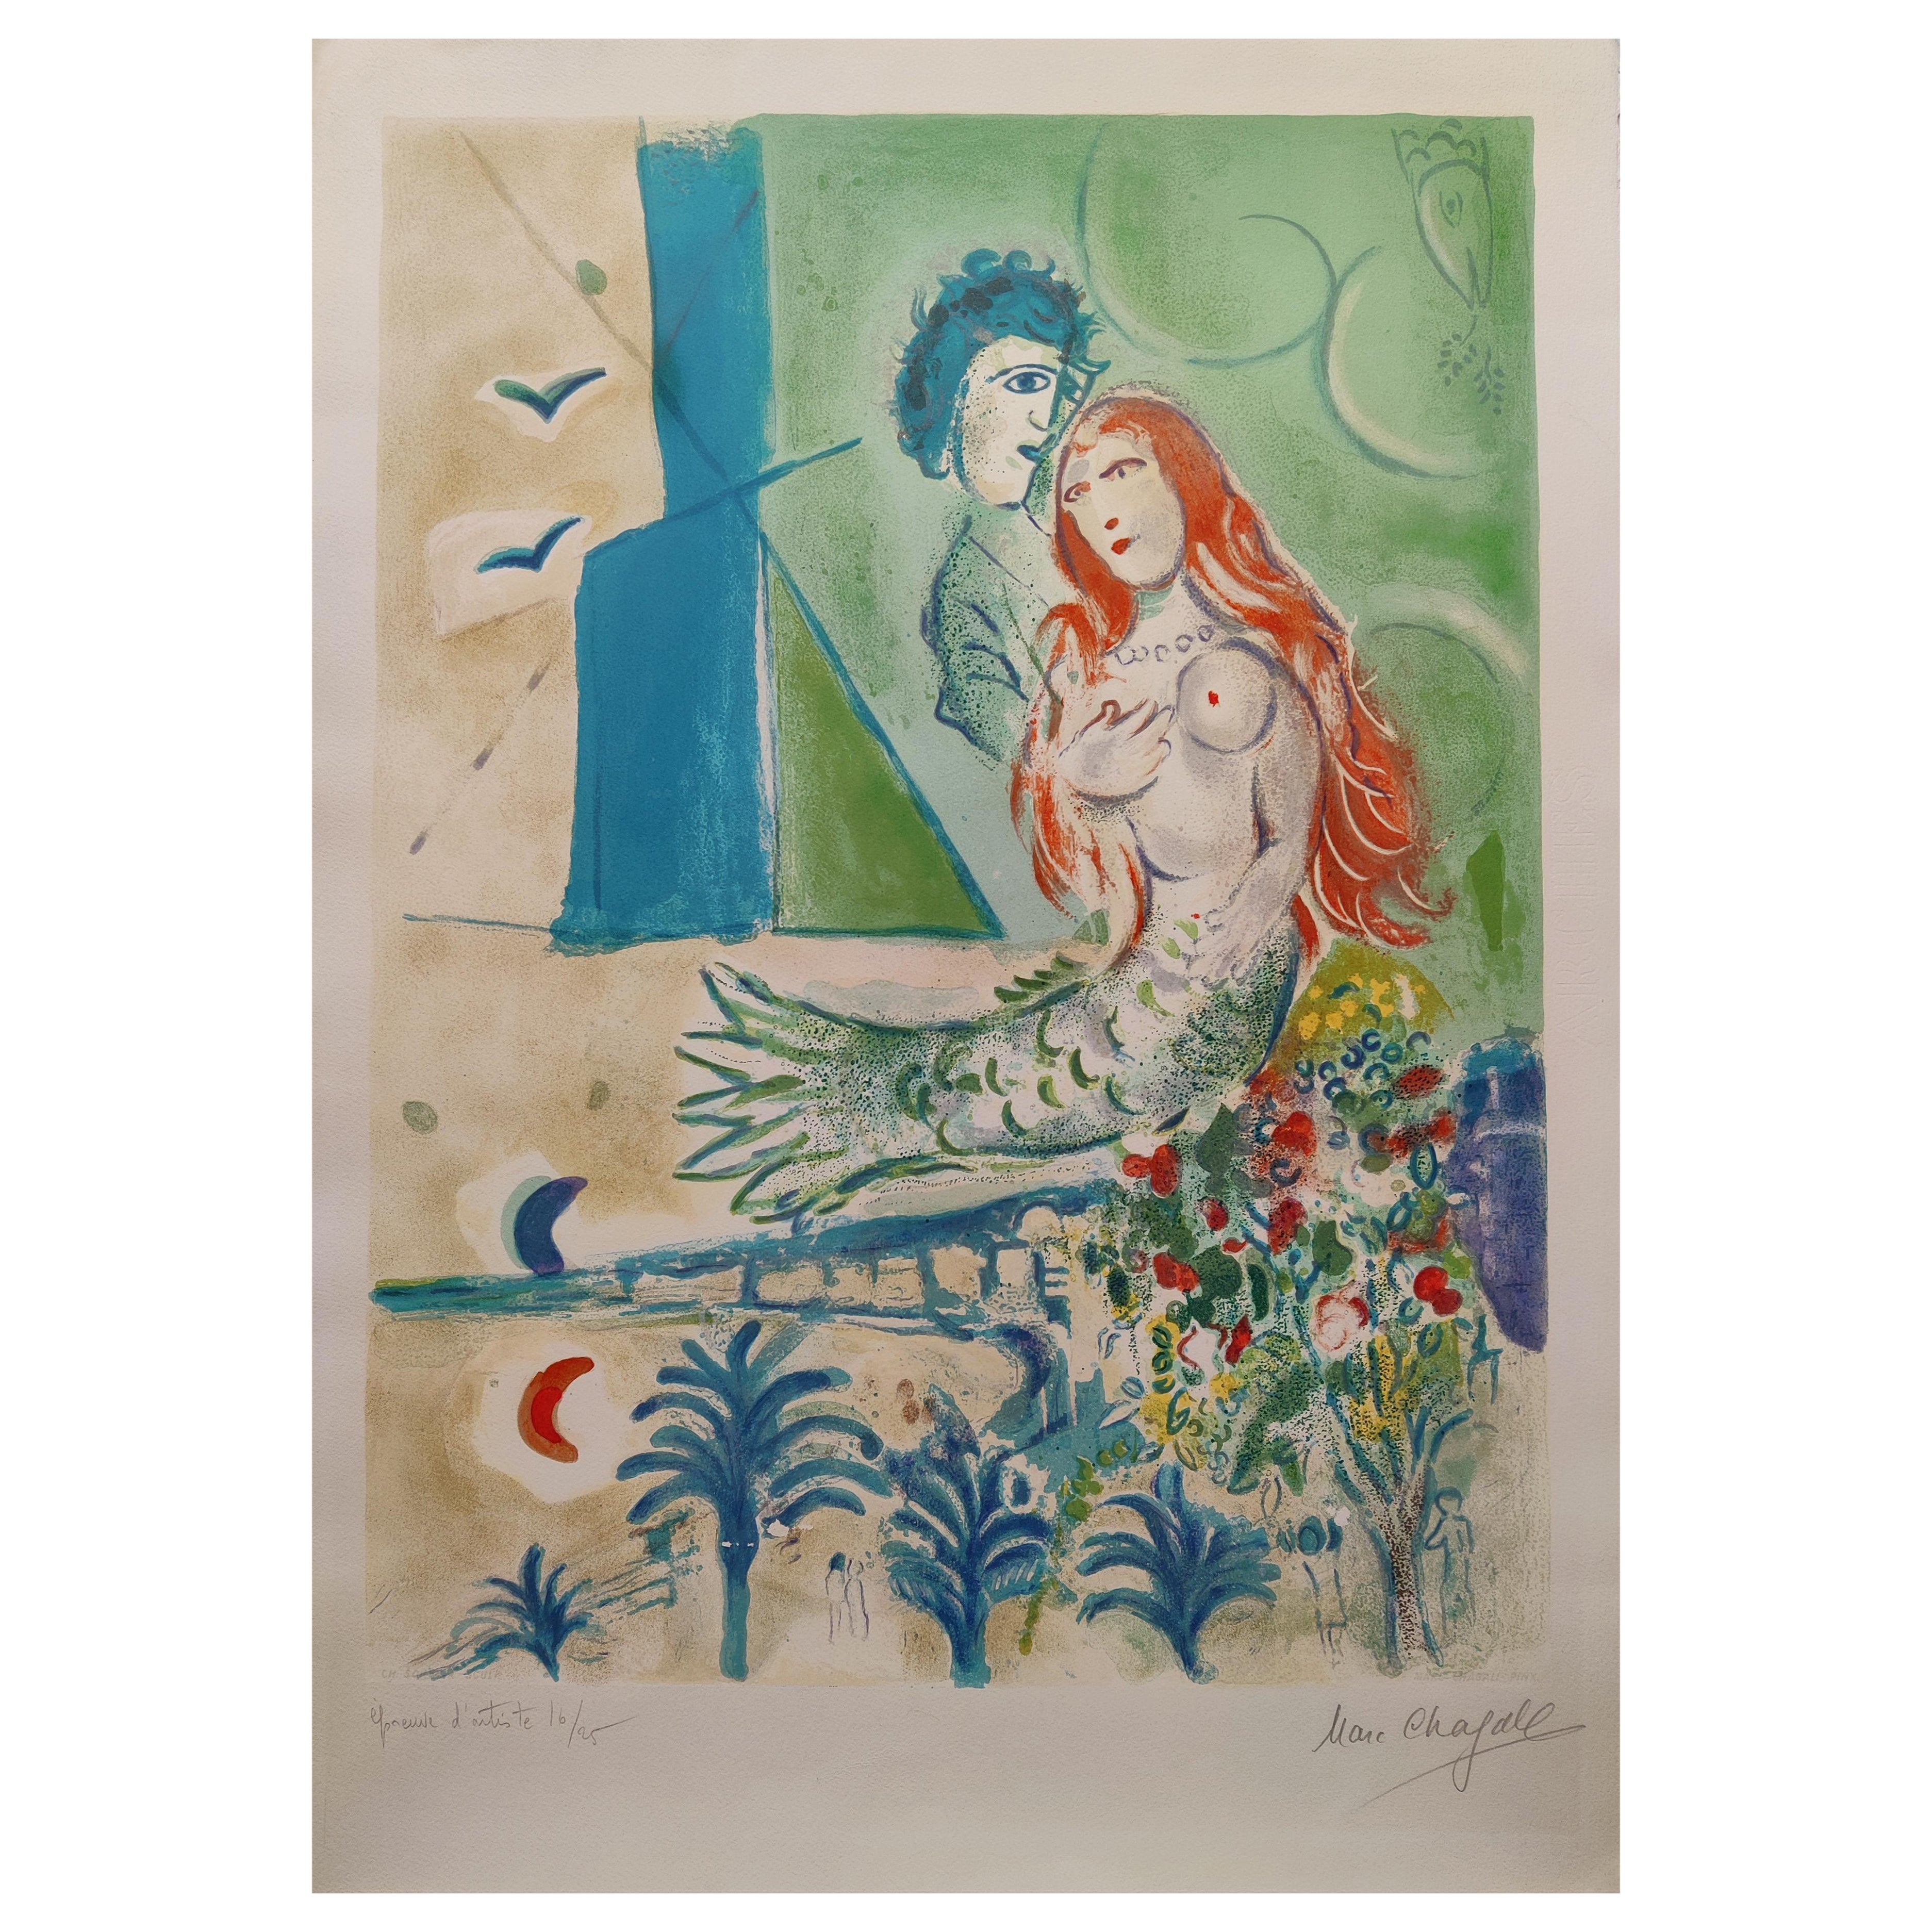 (After) Marc Chagall
Siren with the Poet, from Nice and the Côte d'Azur, 1967
EA 16/25
Hang signed low right
Image size 61.5 X 45.5
Sheet size  73.2 x 52.6
The paper bears the Arches watermark in the right margin and is stamped with the ink stamp of